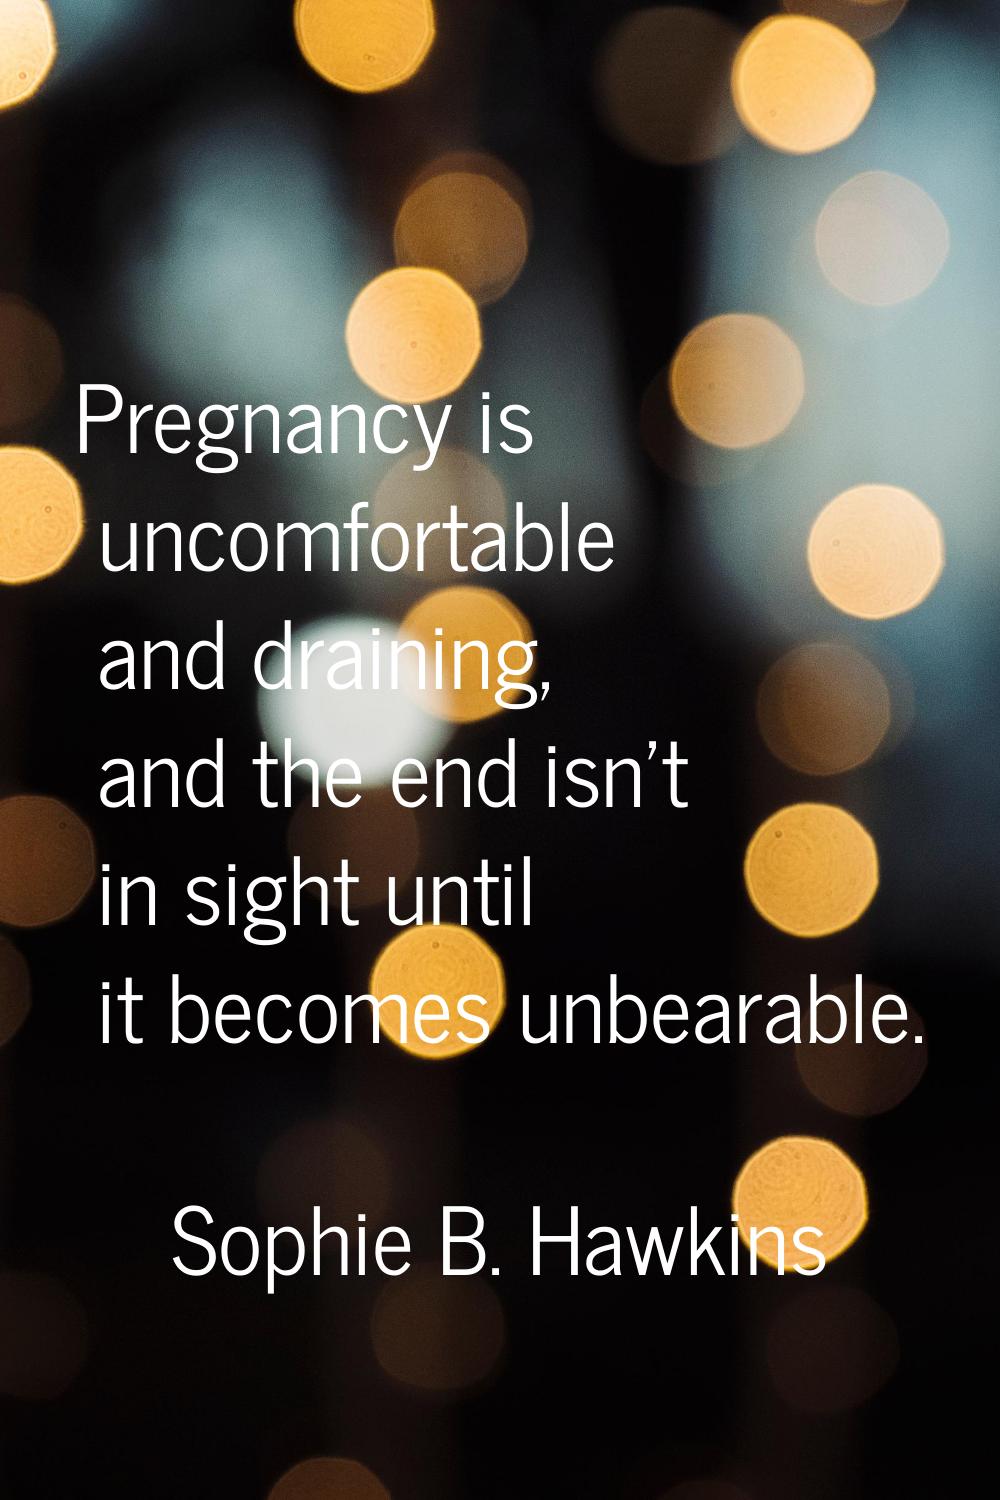 Pregnancy is uncomfortable and draining, and the end isn't in sight until it becomes unbearable.